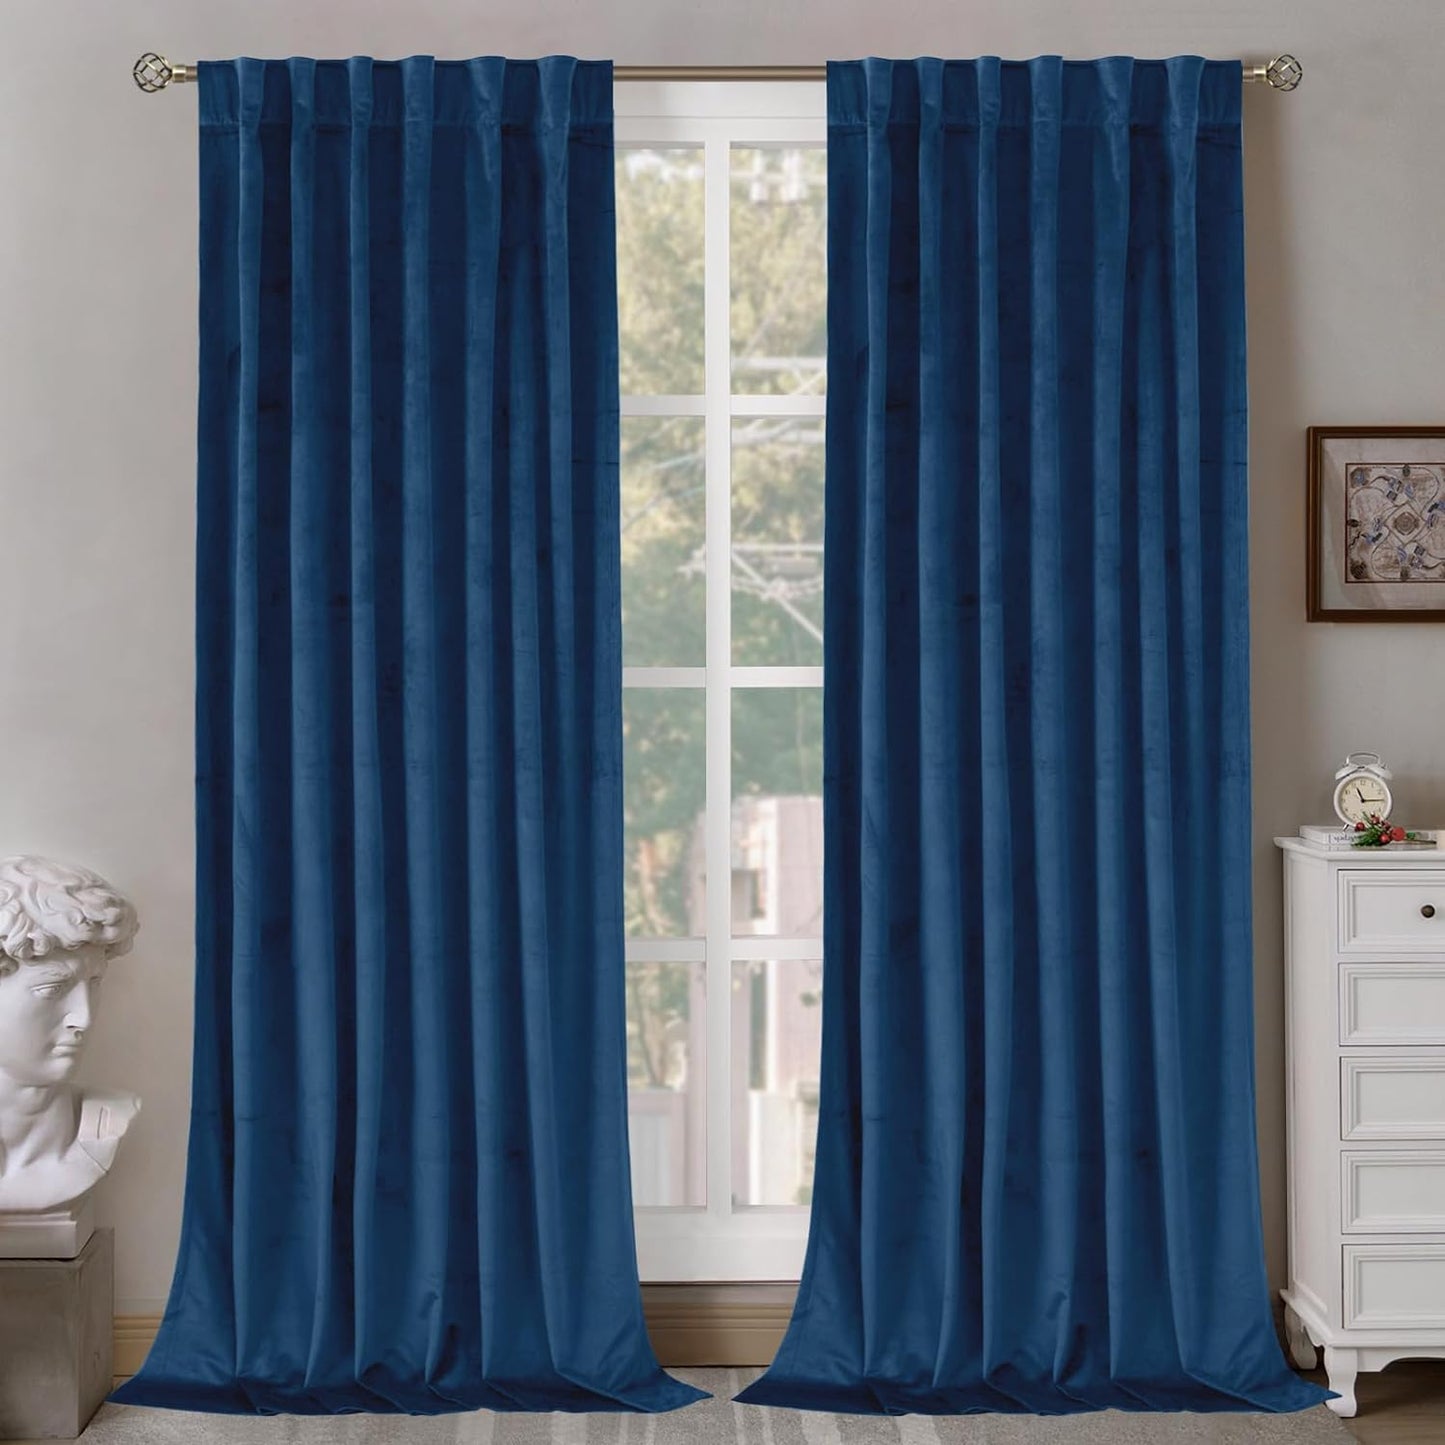 Bgment Grey Velvet Curtains 108 Inches Long for Living Room, Thermal Insulated Room Darkening Curtains Drapes Window Treatment with Back Tab and Rod Pocket, Set of 2 Panels, 52 X 108 Inch  BGment Blue 52W X 120L 